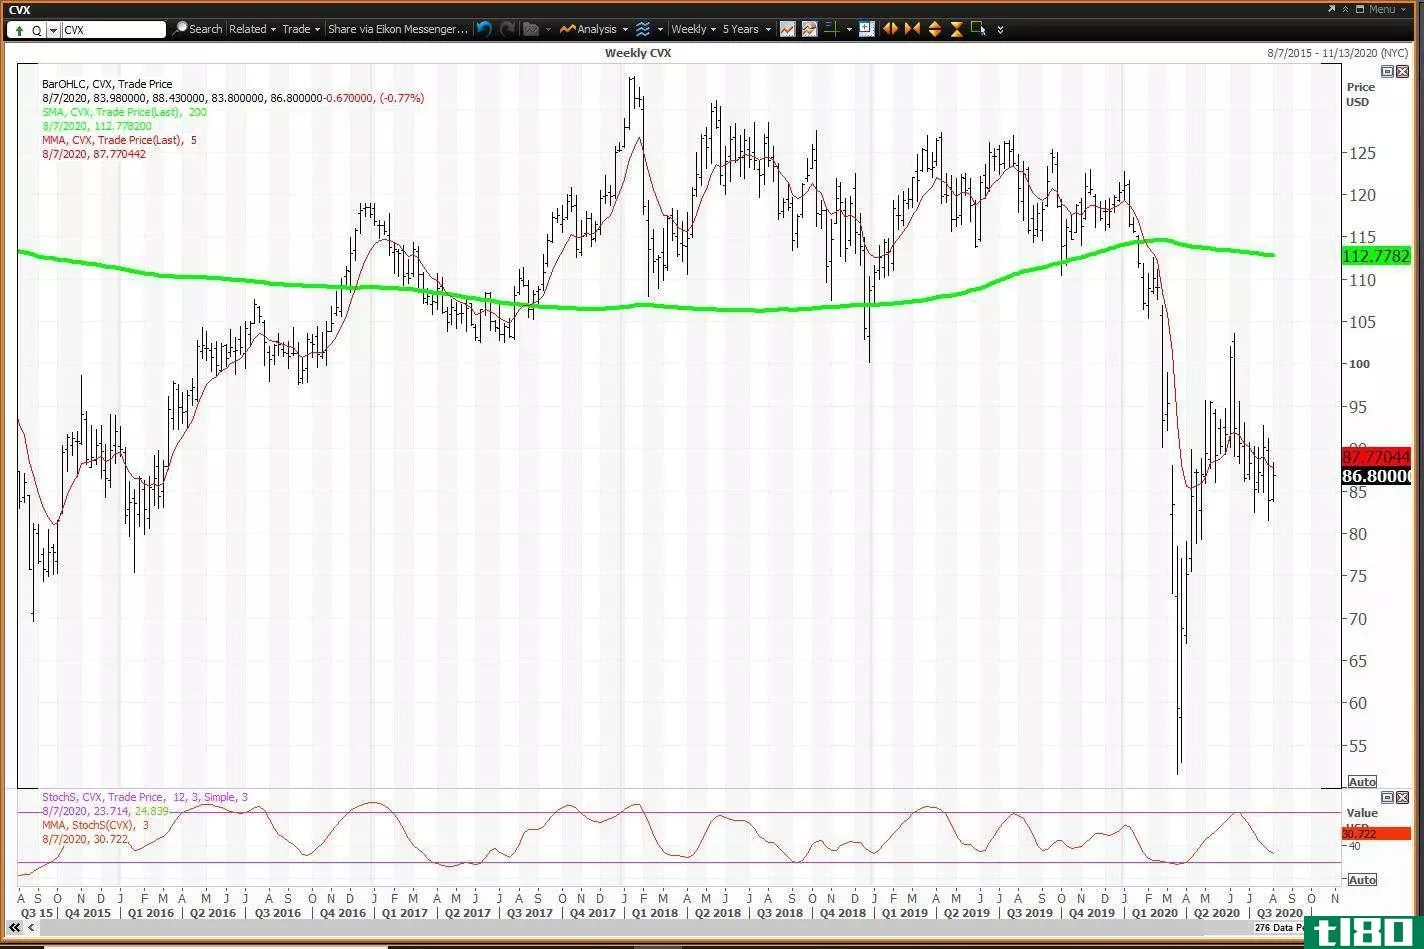 Weekly chart showing the share price performance of Chevron Corporation (CVX)